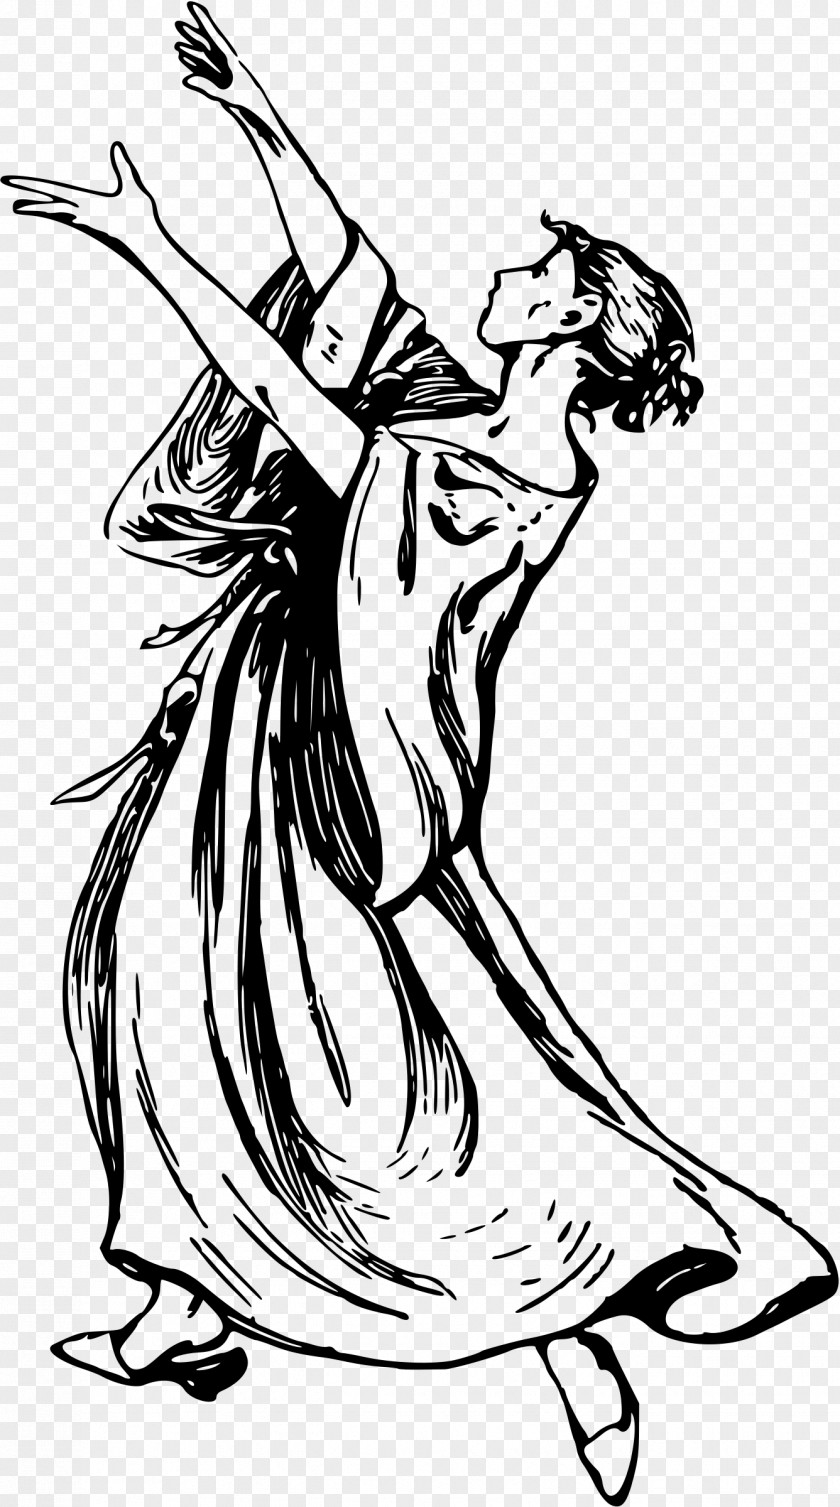 Dancing LADY Black And White Drawing Dance Clip Art PNG